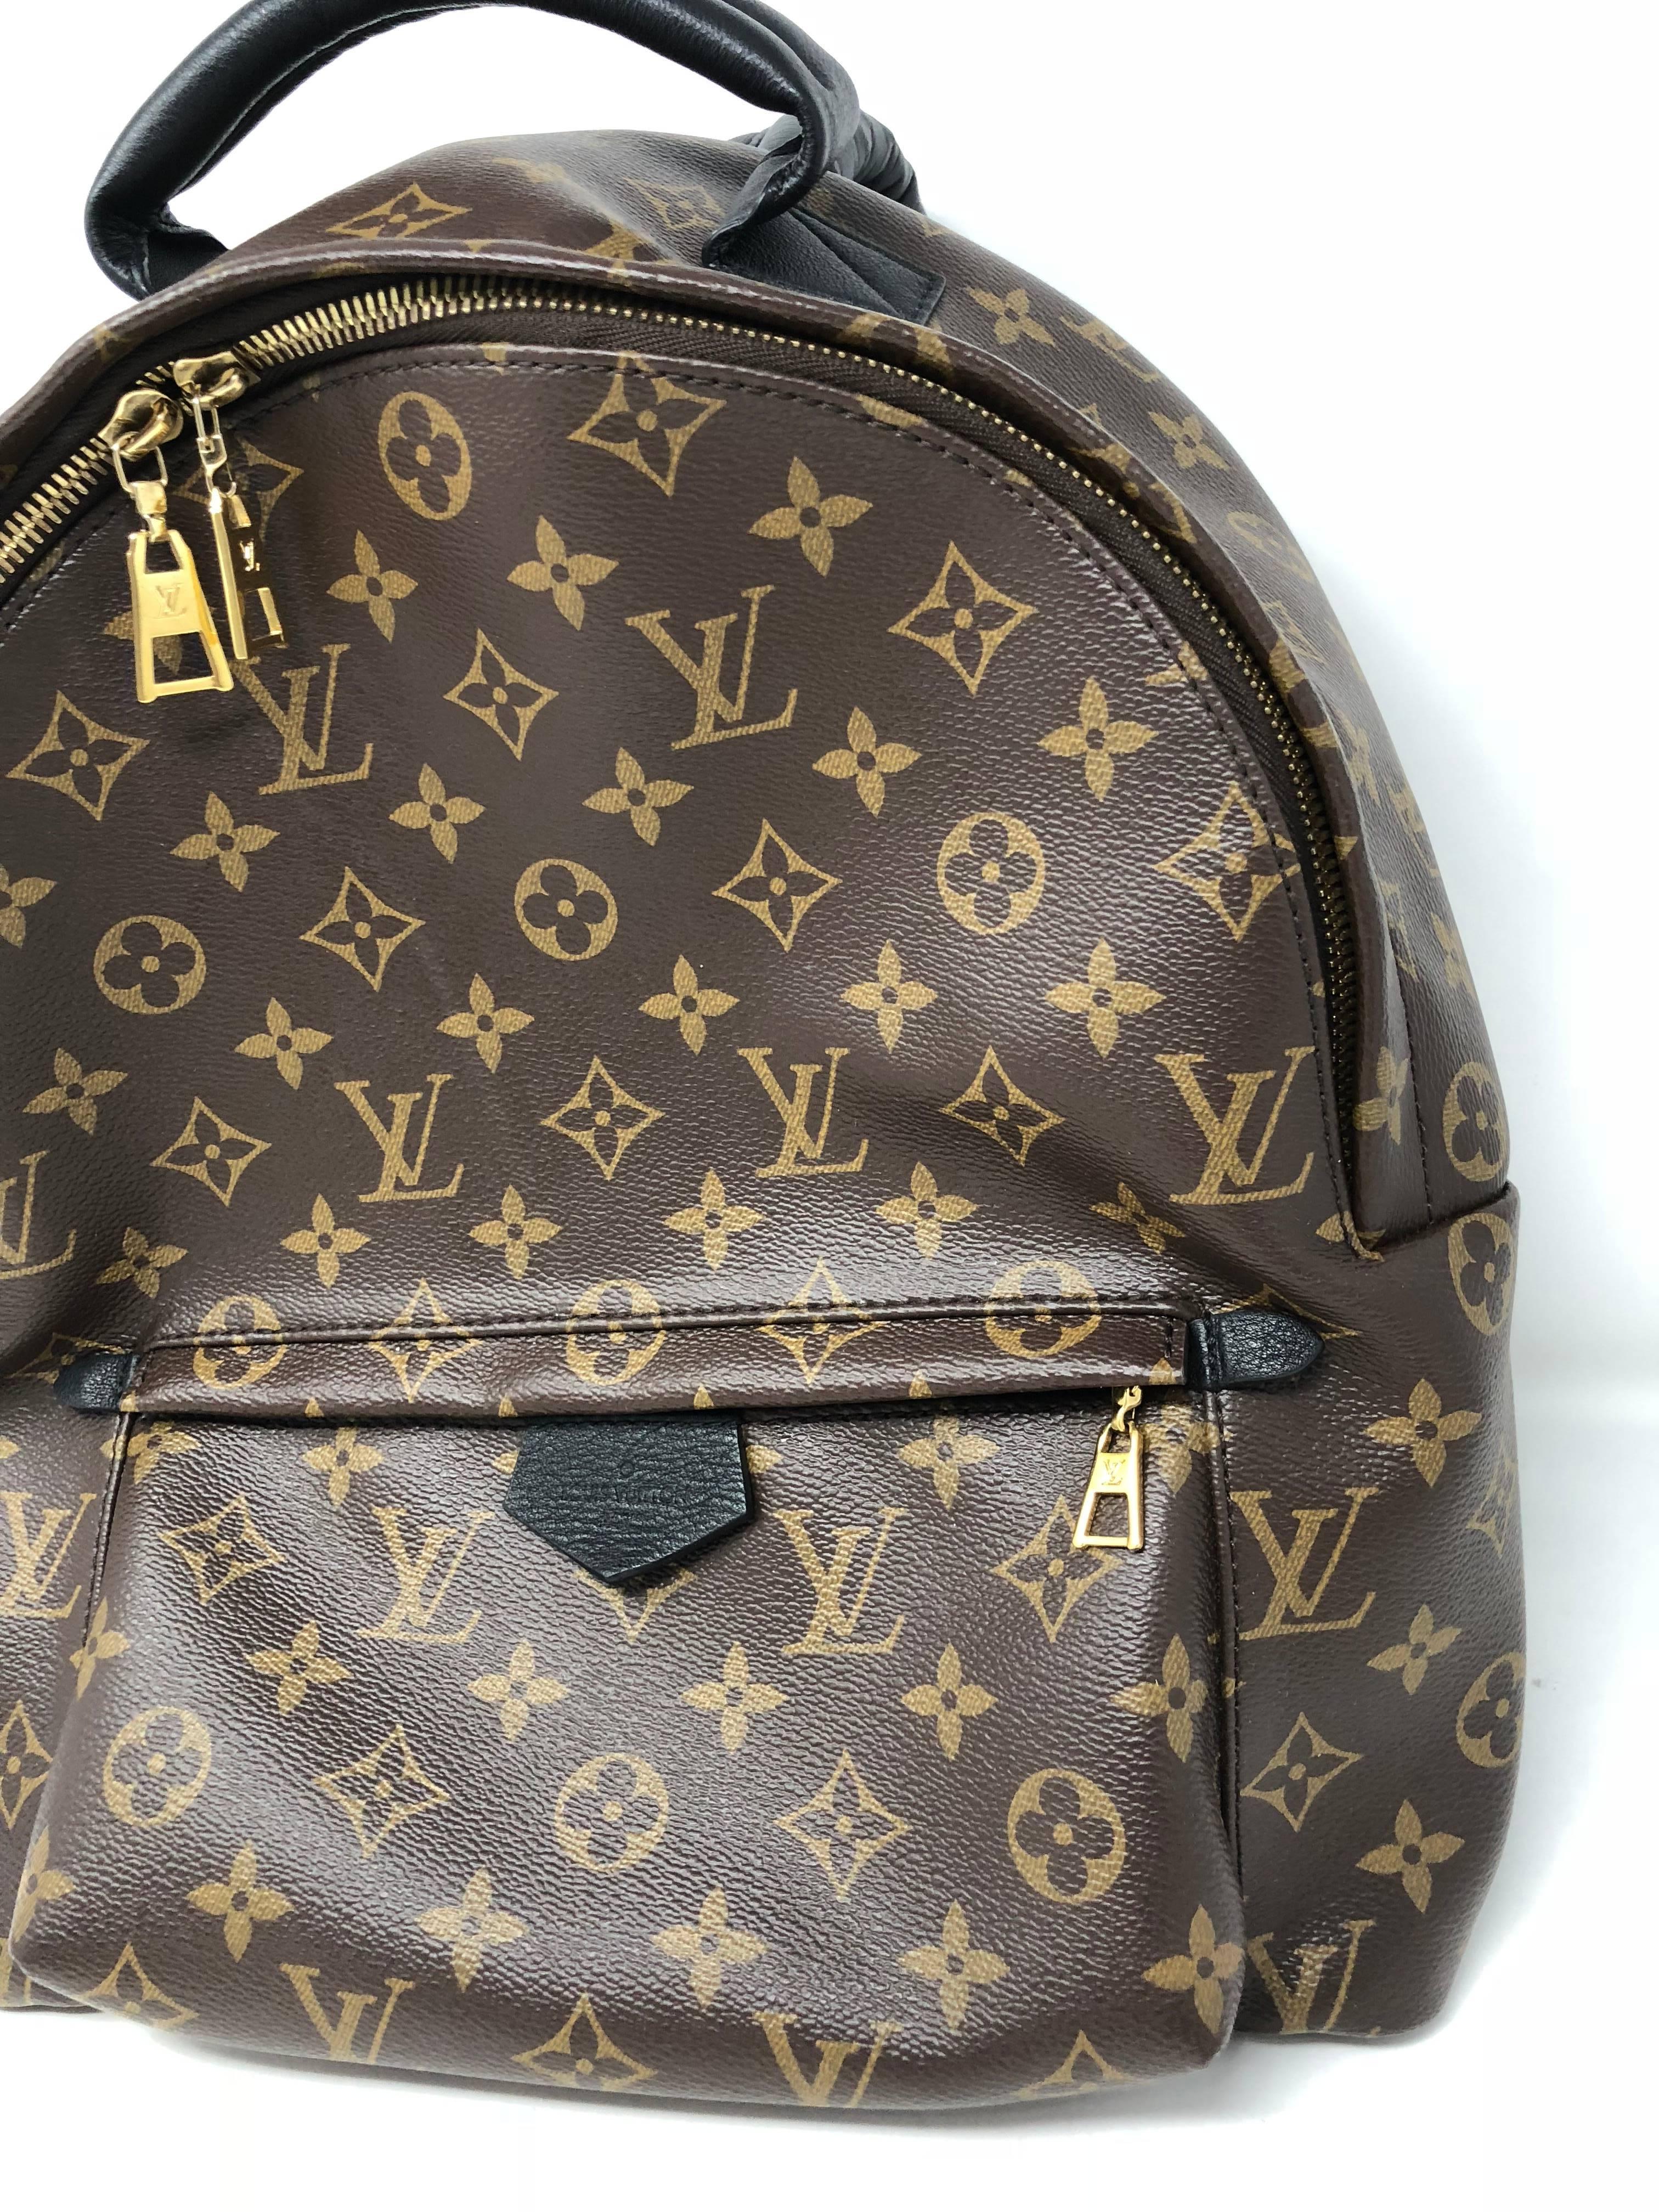 Louis Vuitton Backpack Palm Springs MM in monogram.  This backpack has signature monogram with black calfskin trim for a defined look and matching black top handle and straps. The thick straps are adjustable and comfortable. Backpack is in mint